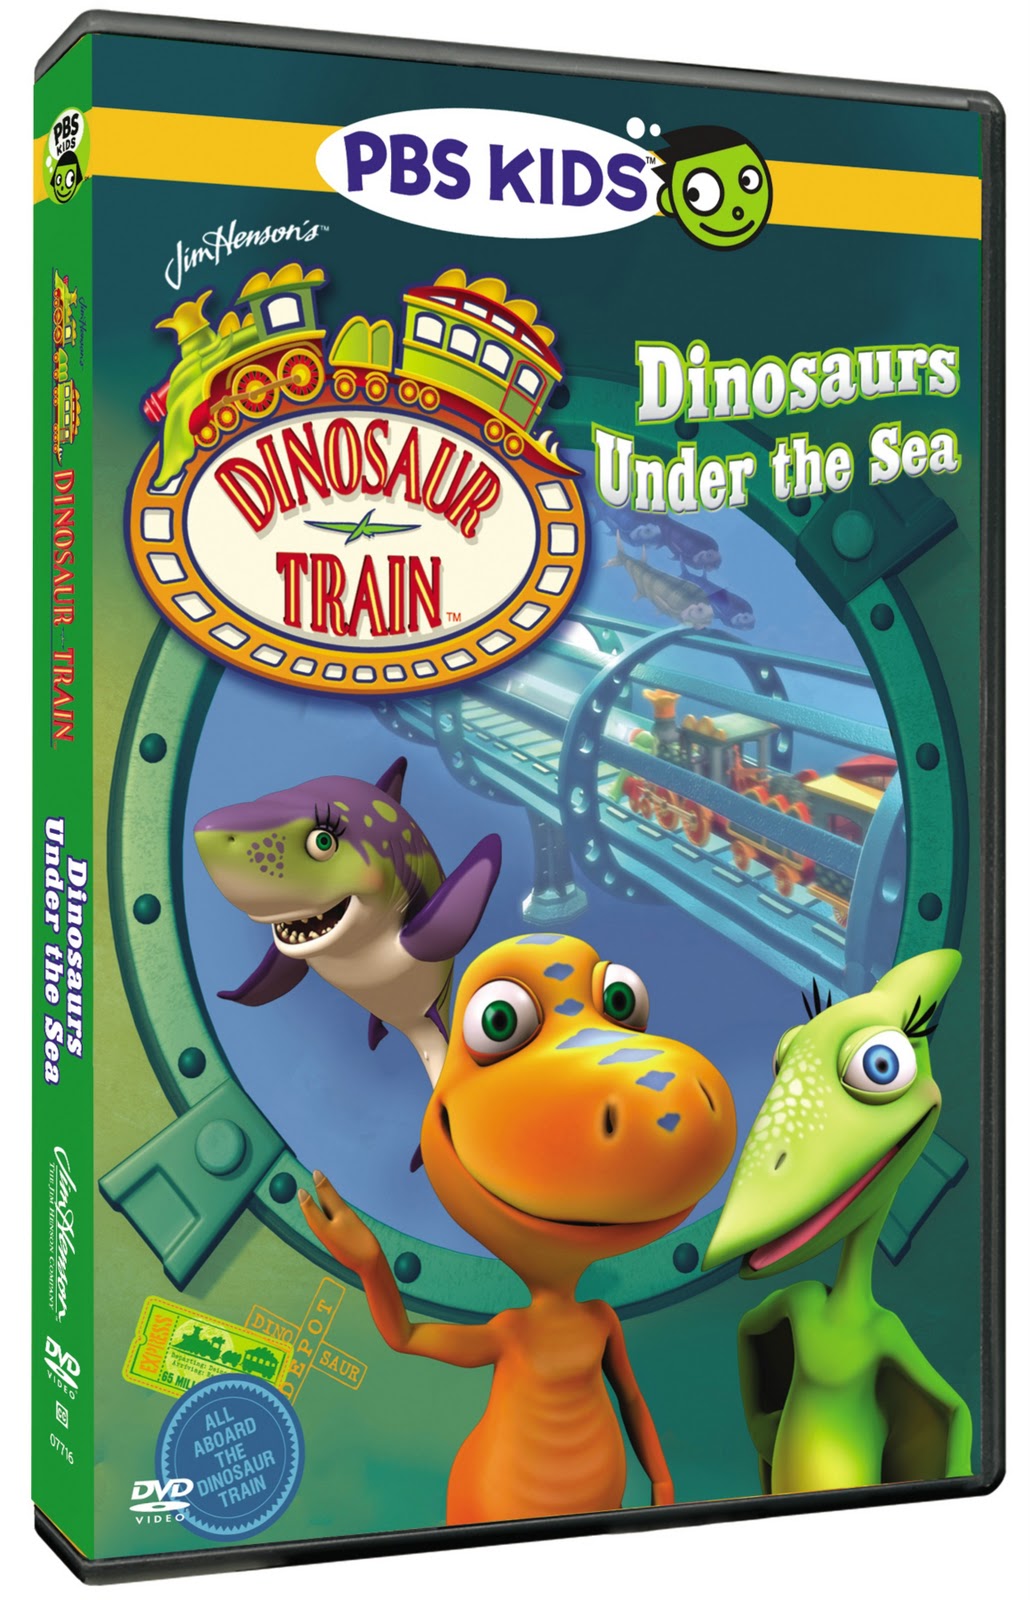 Dinosaur Train DVD - 3 Awesome Options for Your Dinosaur Fan